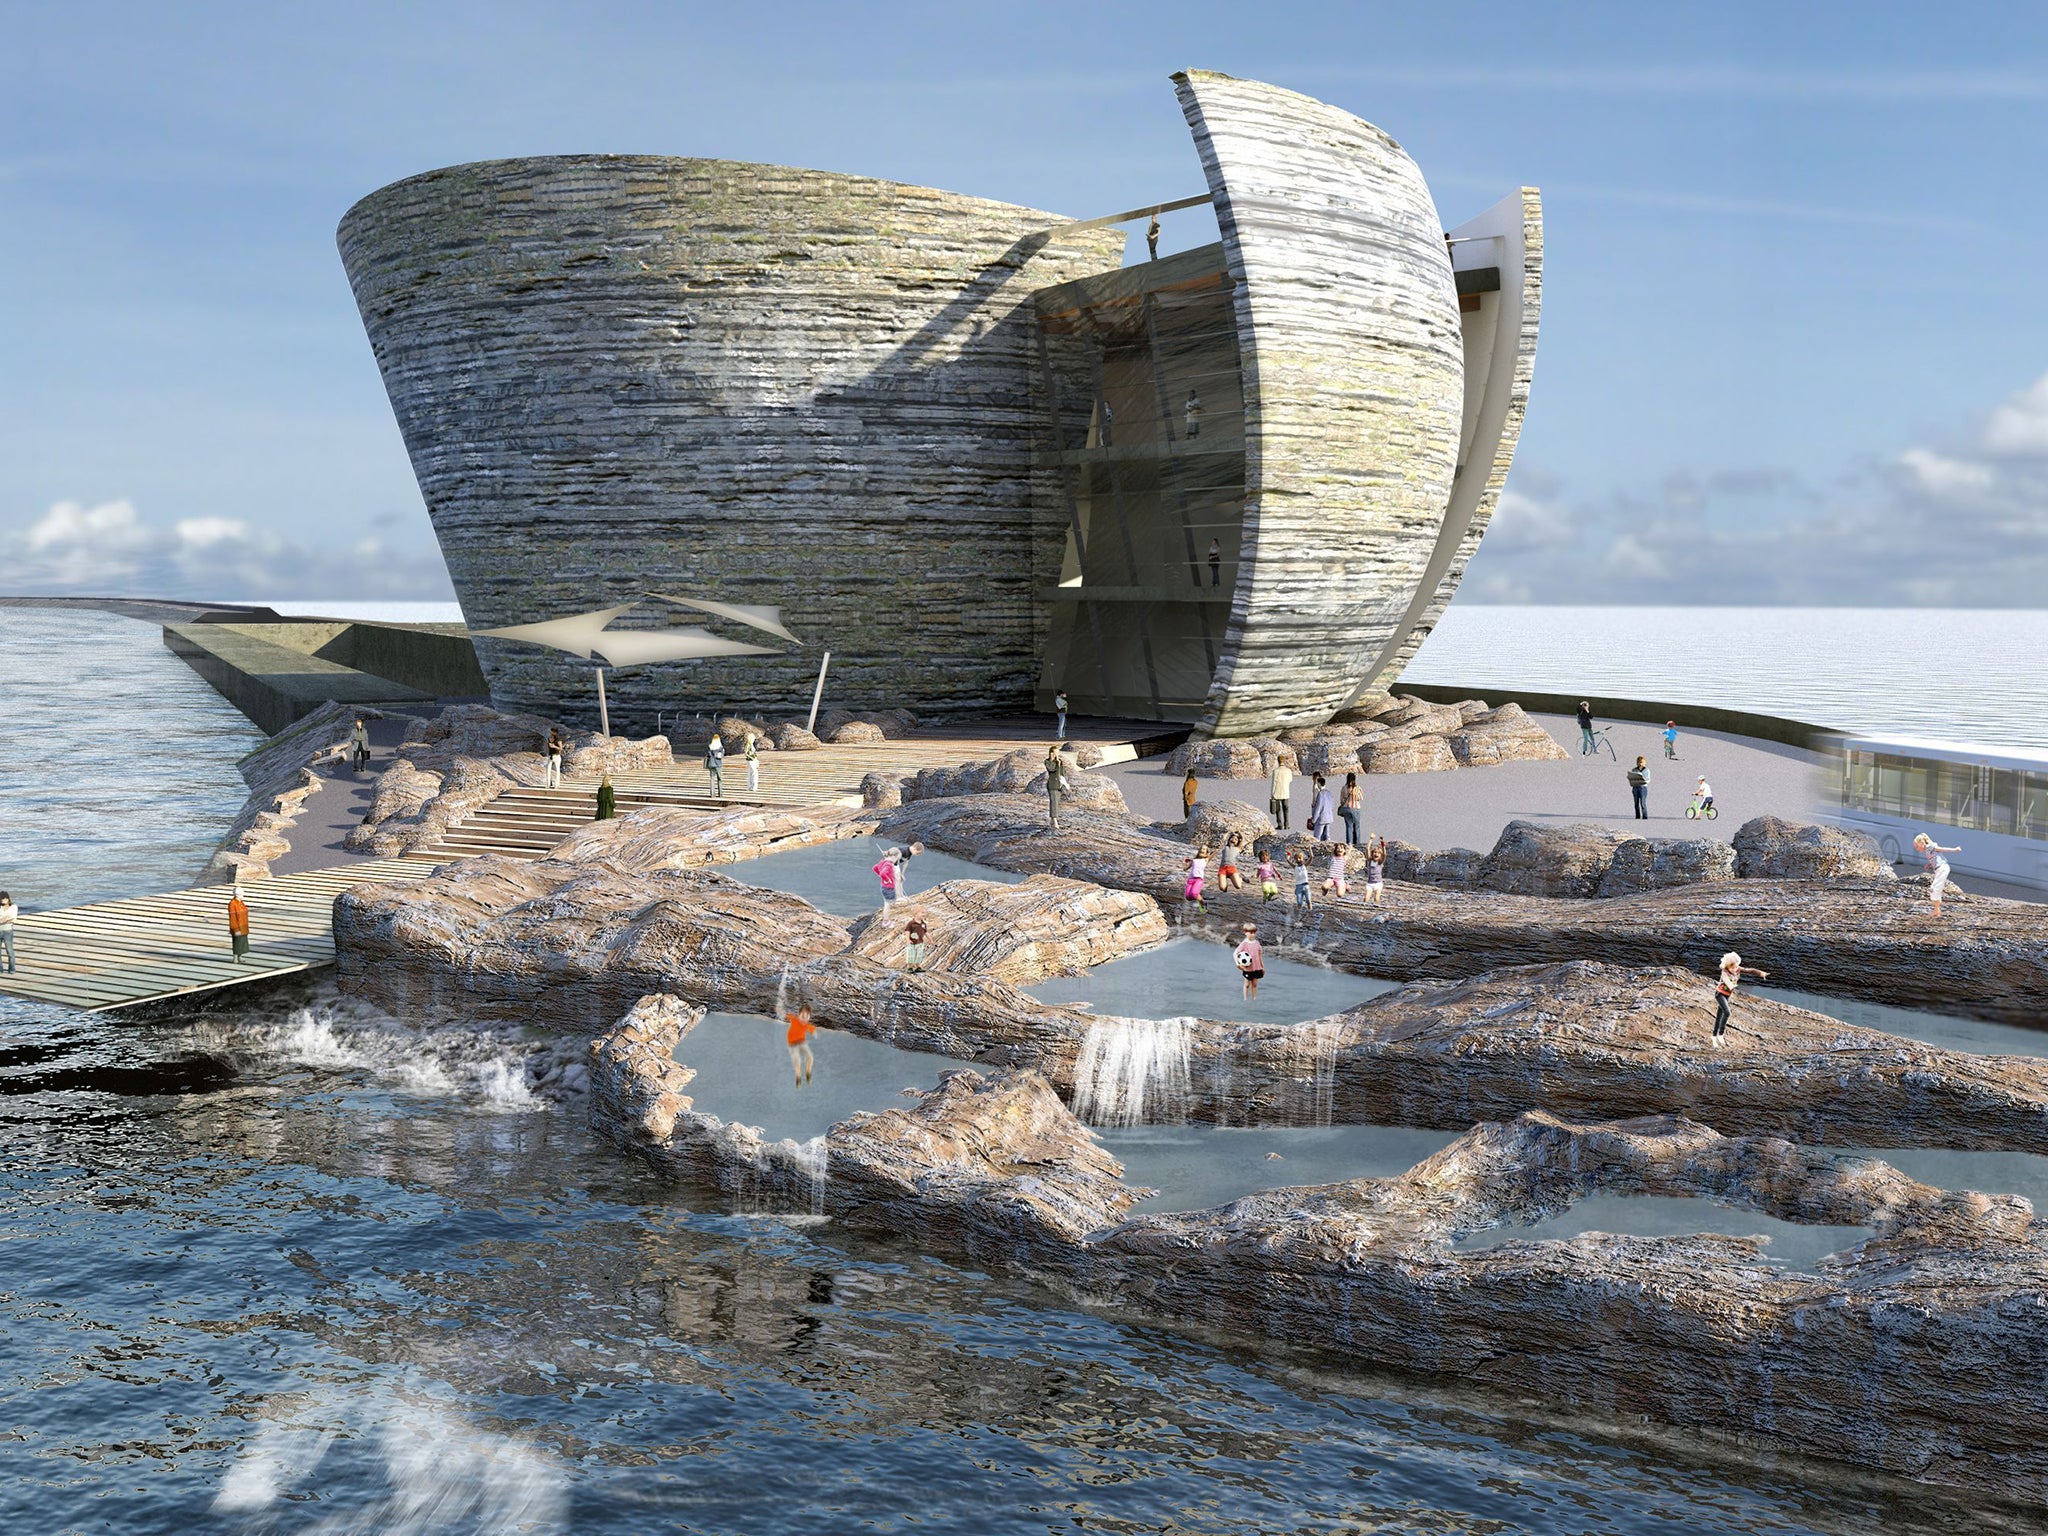 dated file handout artist's impression issued by Tidal Lagoon Power of how the world's first tidal lagoon power plant may look in Swansea Bay, South Wales. Reports that the Government is set to reject plans for a tidal power lagoon in Swansea Bay have been greeted with anger in Wales.